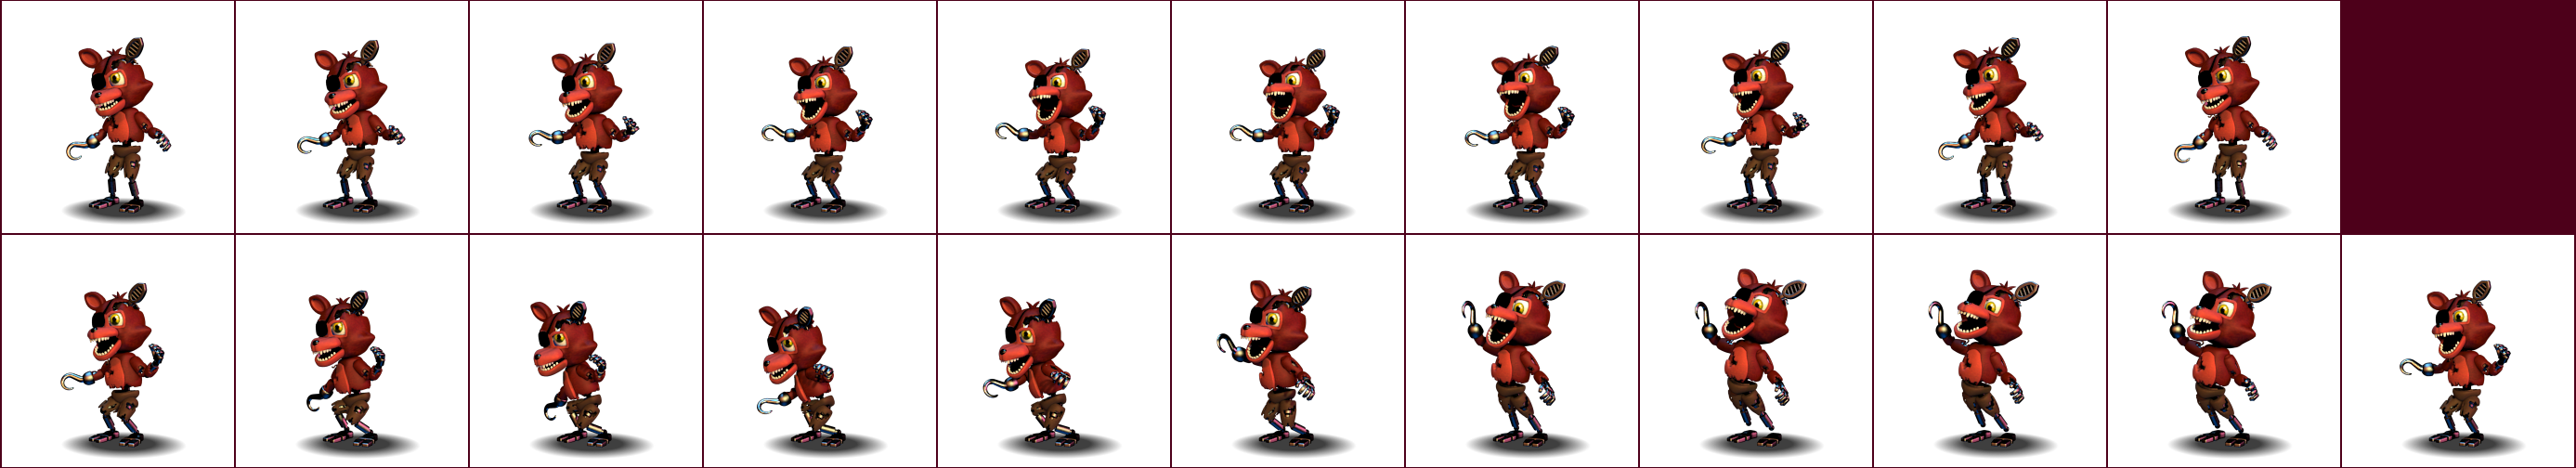 PC / Computer - Five Nights at Freddy's 2 - Withered Foxy - The Spriters  Resource